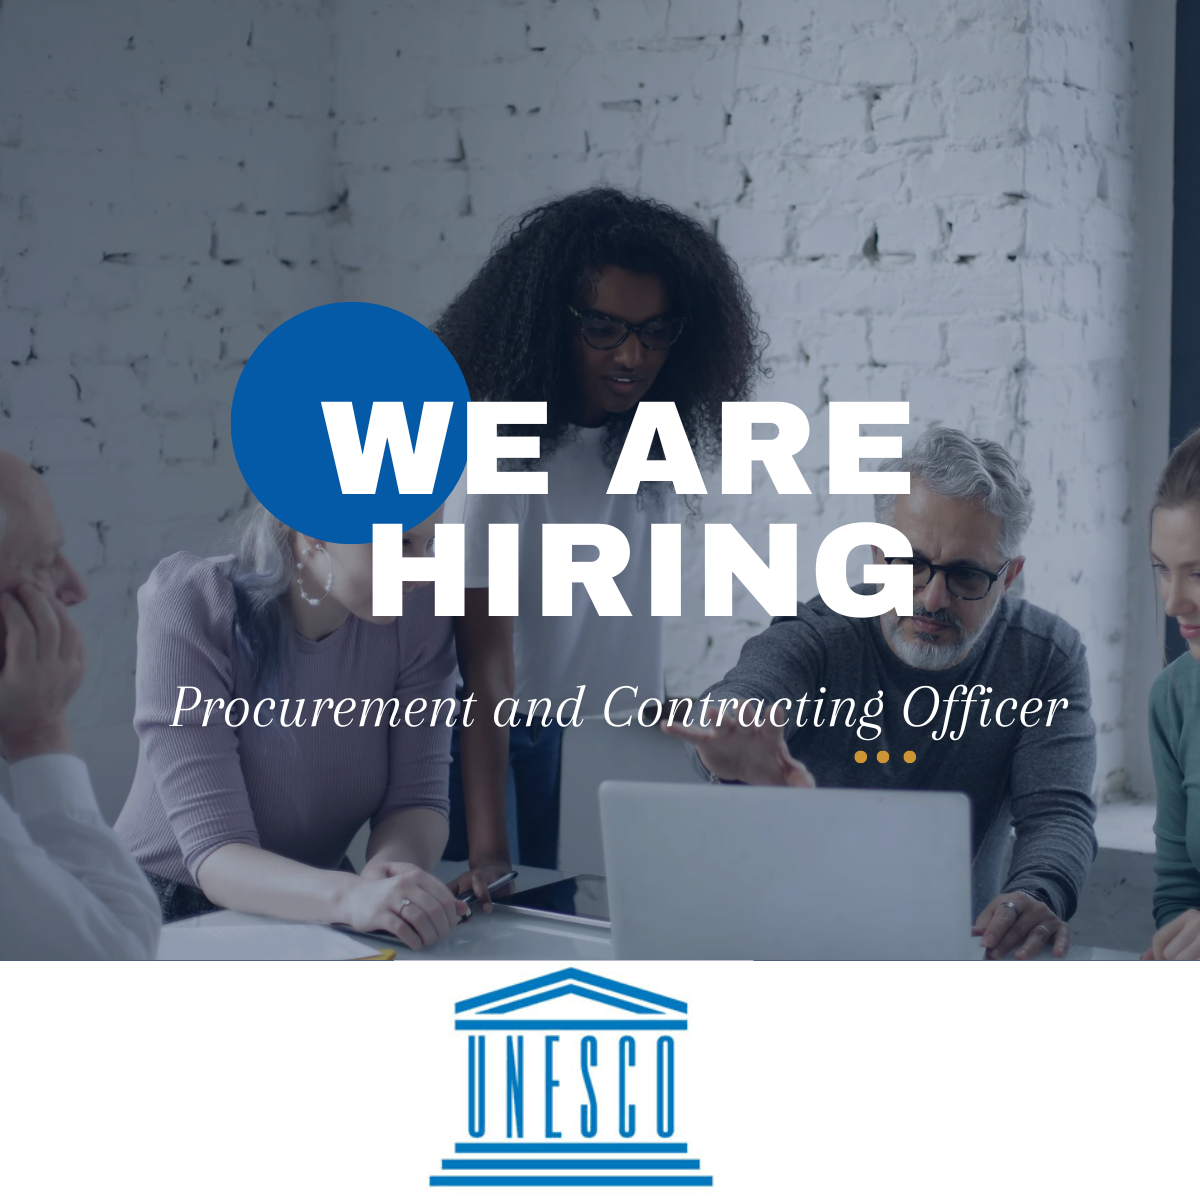 United Nations Educational, Scientific and Cultural Organization (UNESCO) Is Hiring Procurement and Contracting Officer. Apply Now